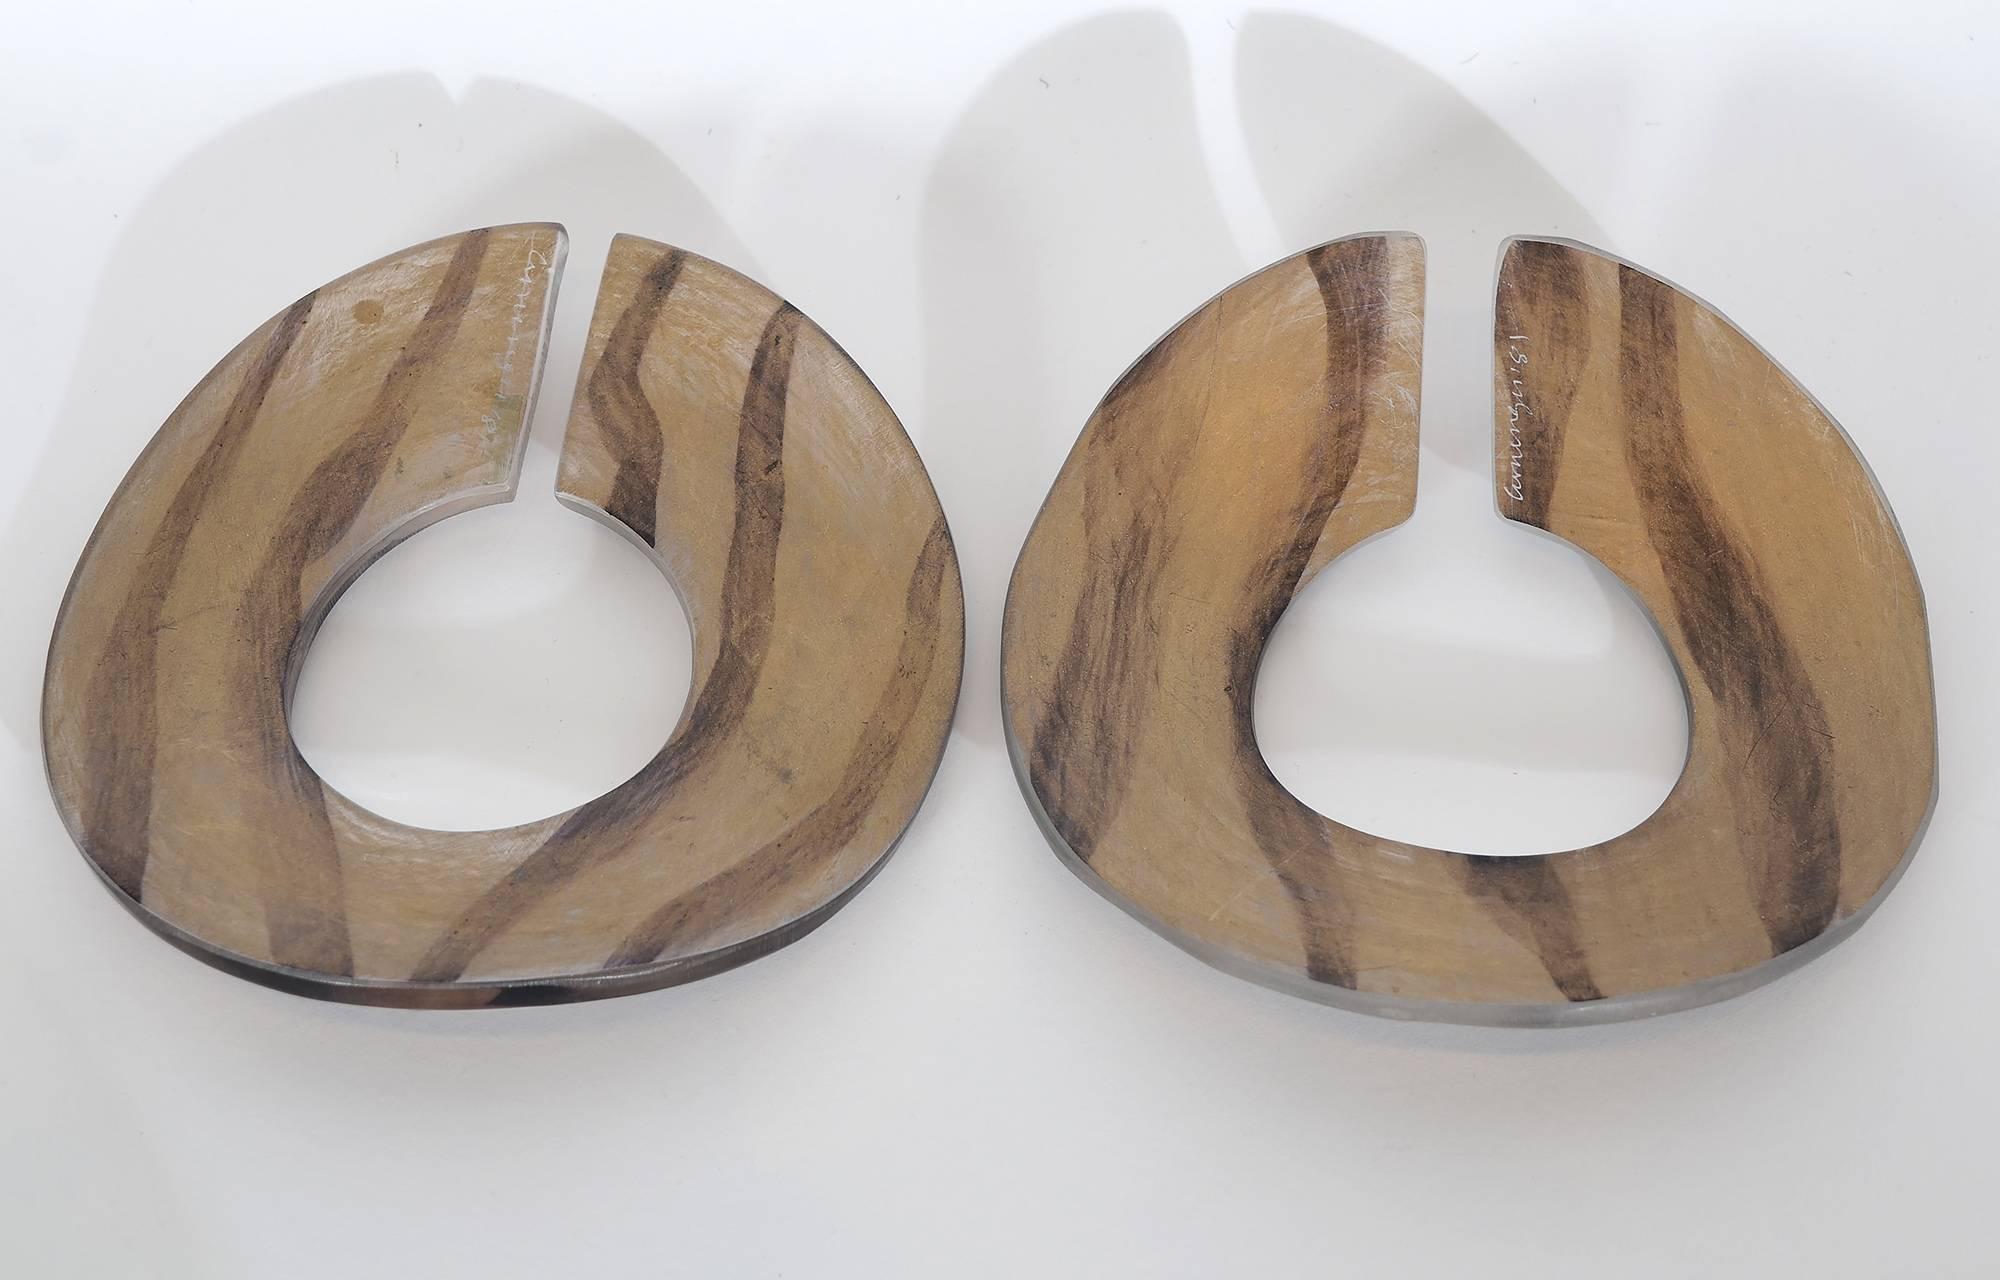 This pair of undulating lucite bracelets were made early in the career of noted American jewelry designer, Angela Cummings. One is matte on both sides and the other is gloss on one and matte on the other. Both are decorated with tiger stripes.   The